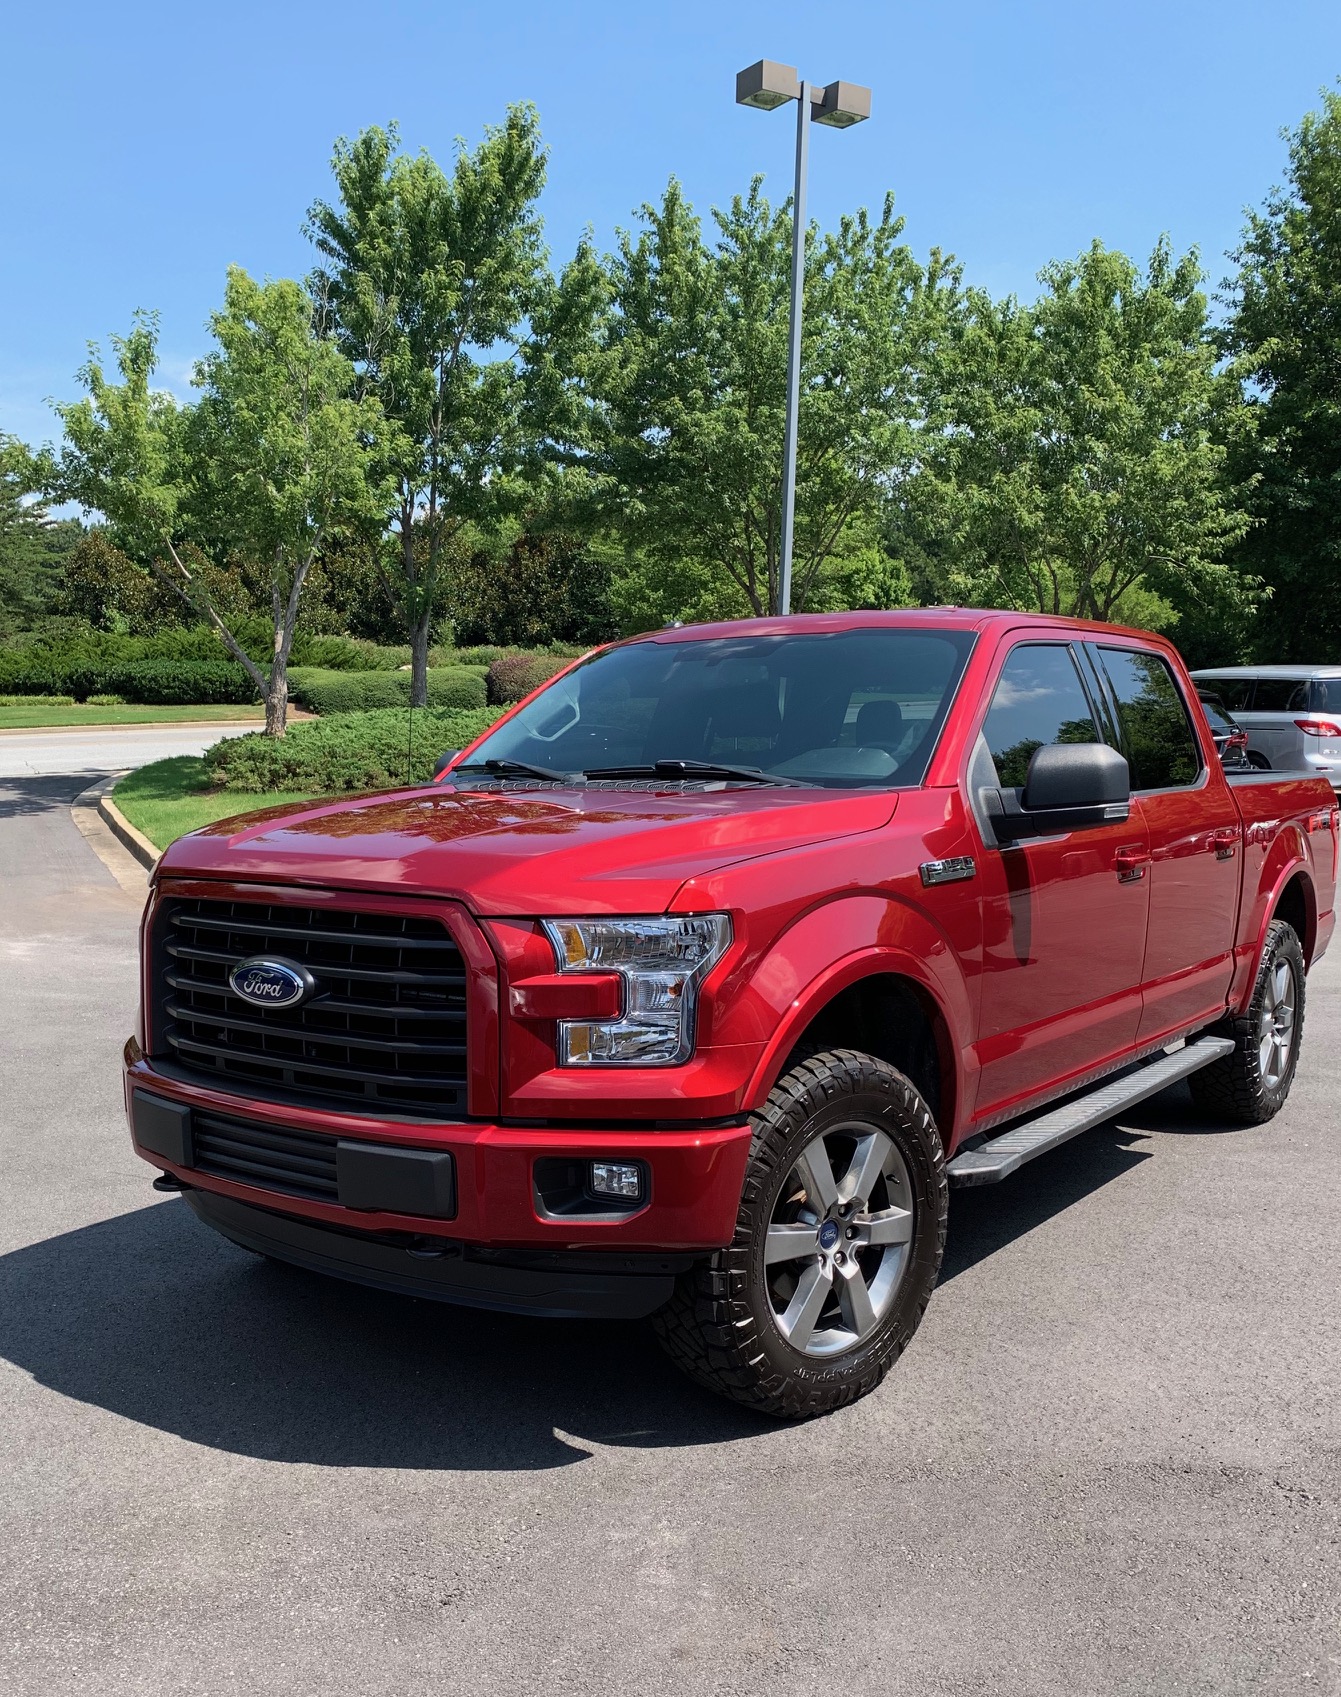 Ford+F-150+repair+-+after+-+front+view